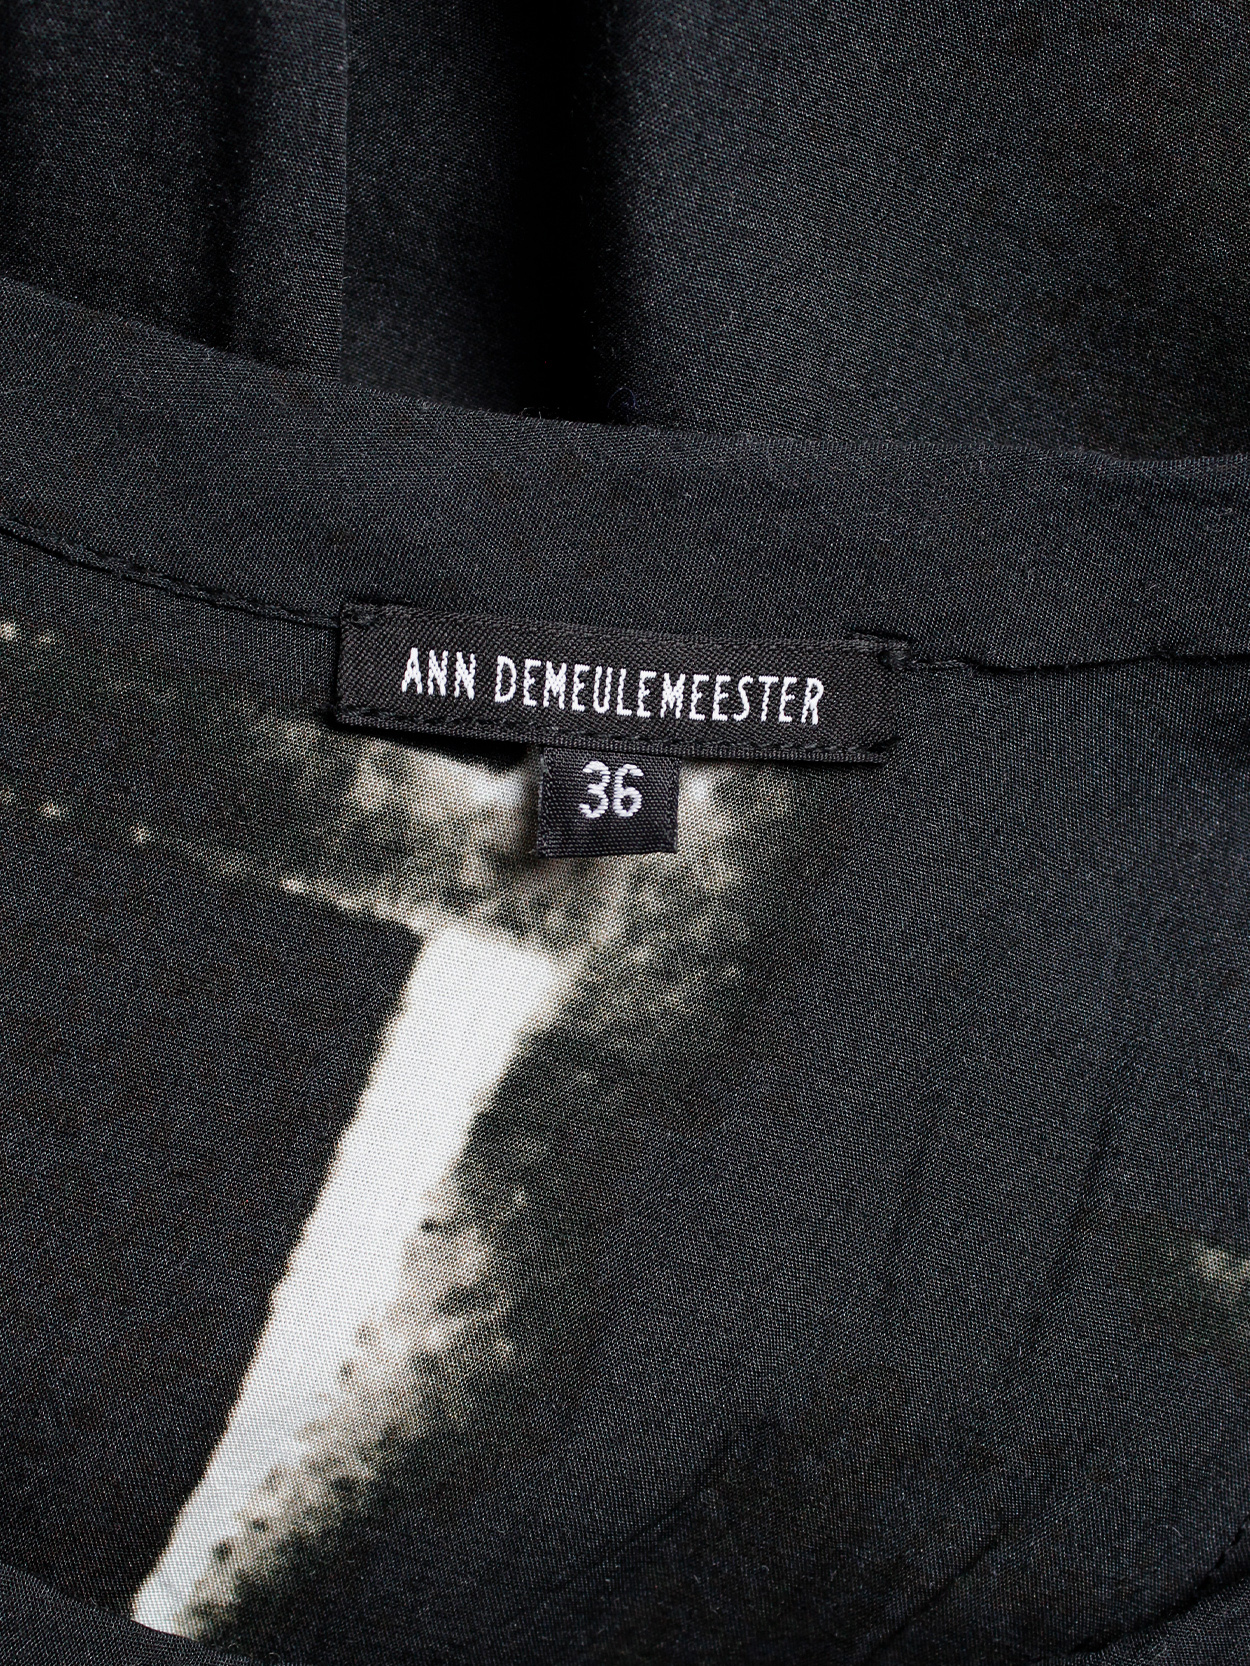 Ann Demeulemeester black dress with beige spraypaint print and straps spring 2011 (17)